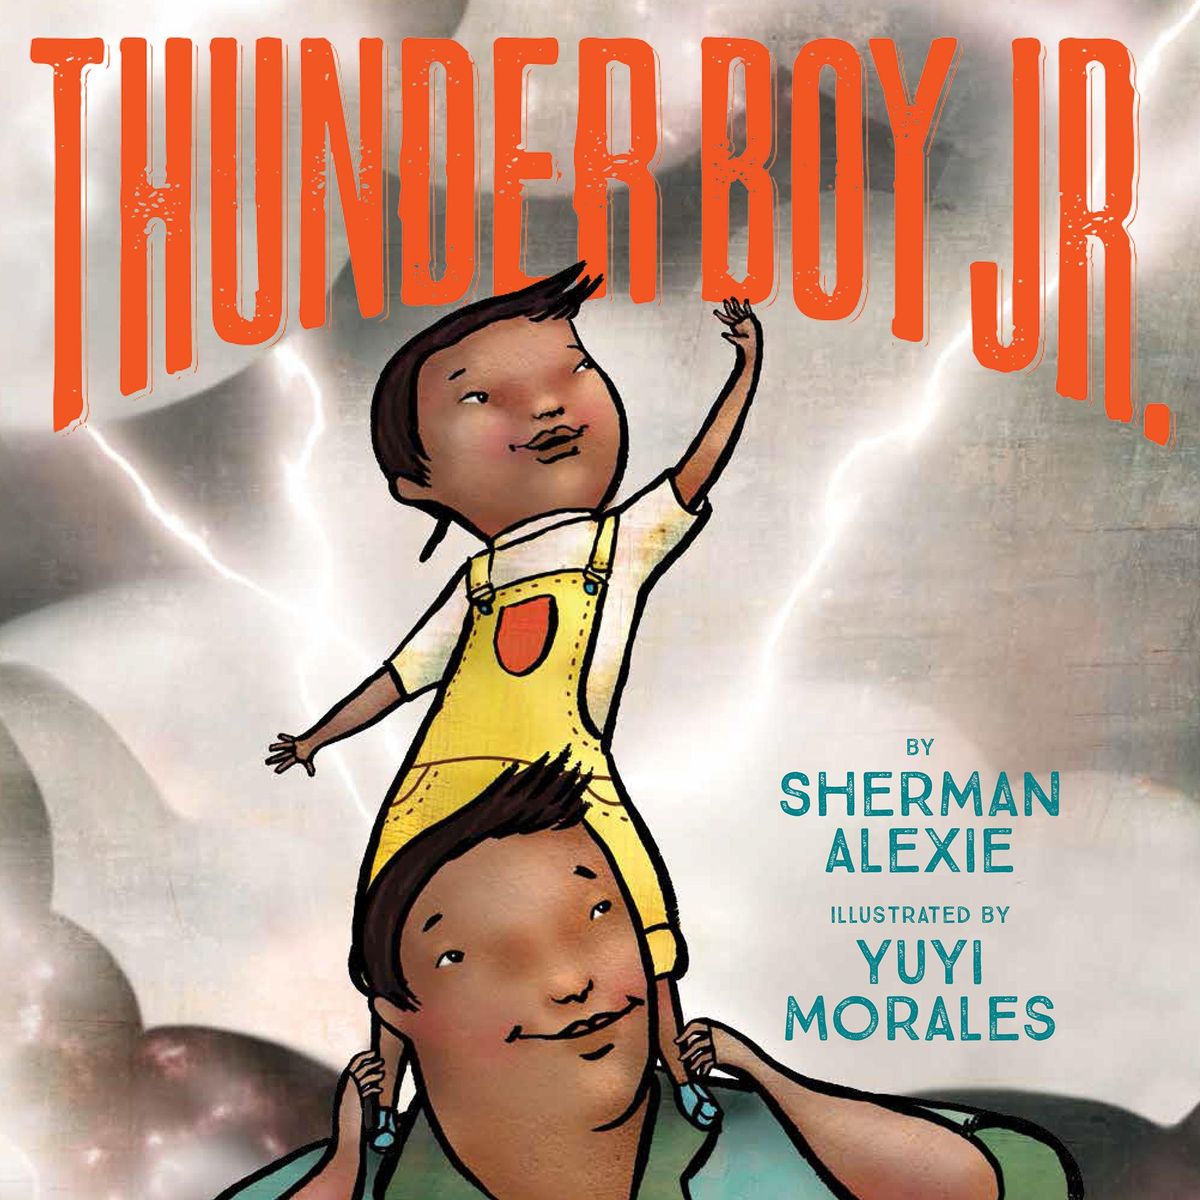 Sherman Alexie will read from his latest book, “Thunder Boy,” at The Bing Crosby Theater in July.